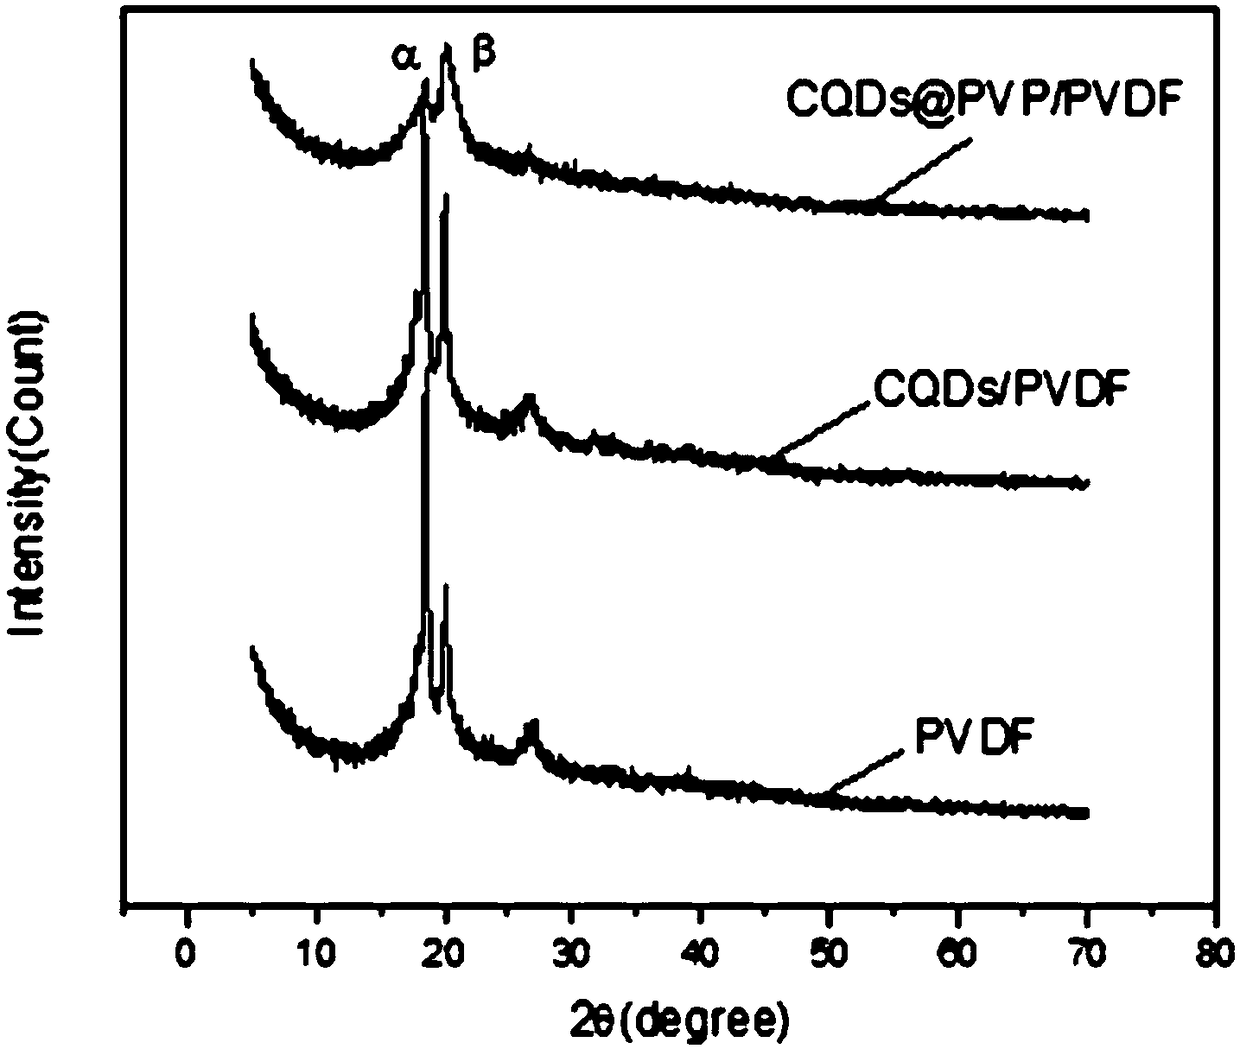 Preparation method for CQDs@PVP/PVDF composite dielectric film